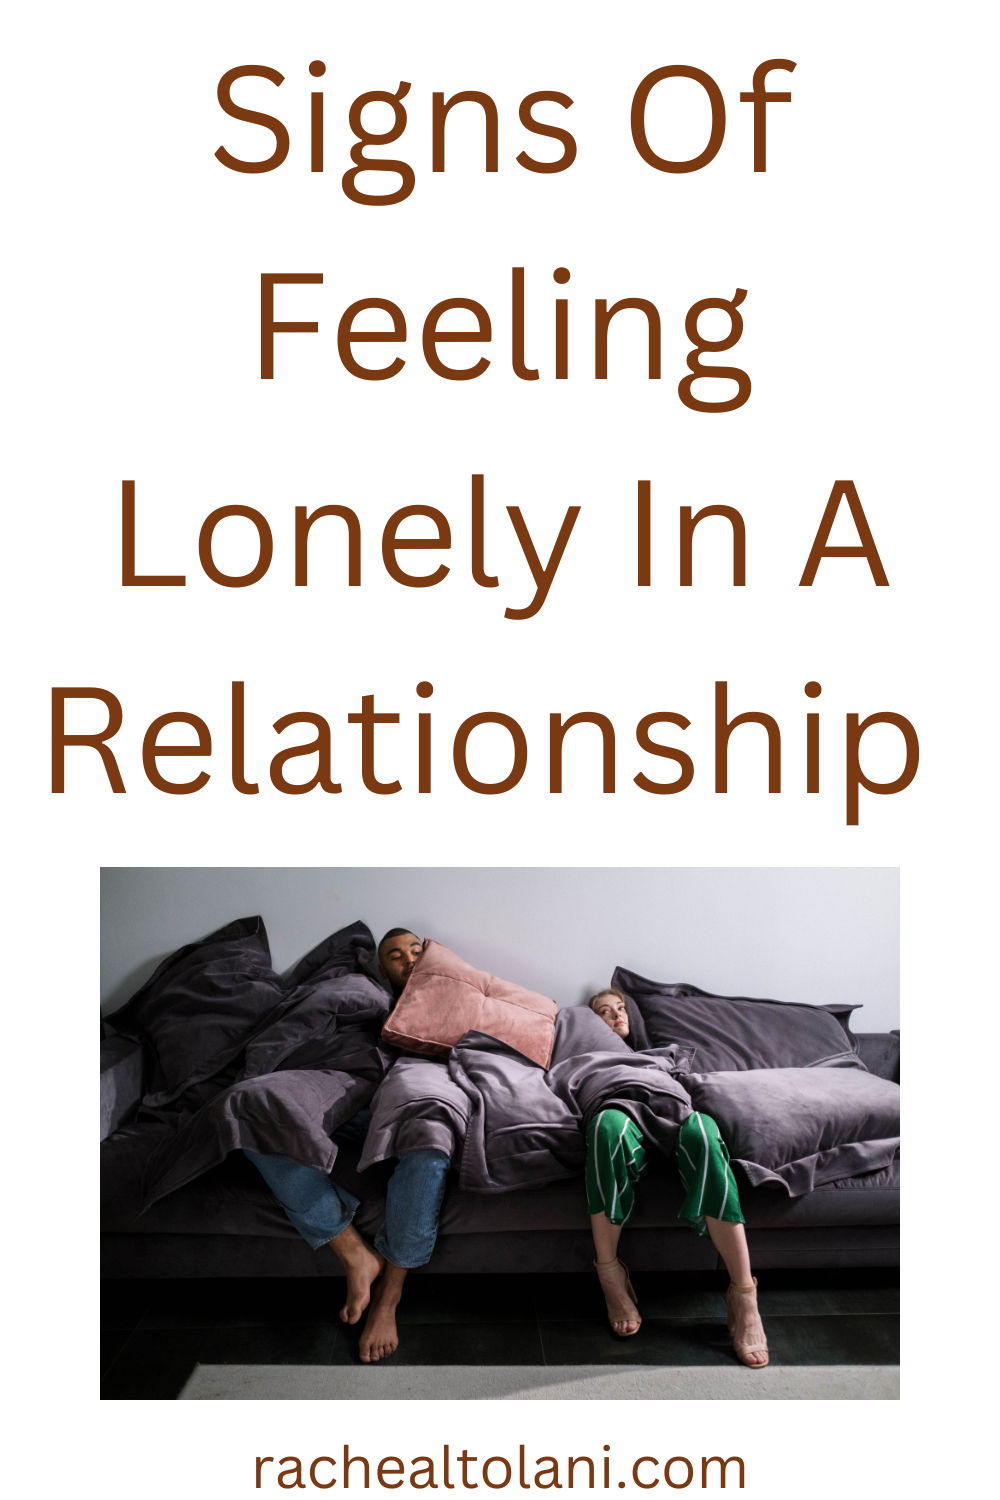 Signs Of Feeling Lonely In A Relationship -